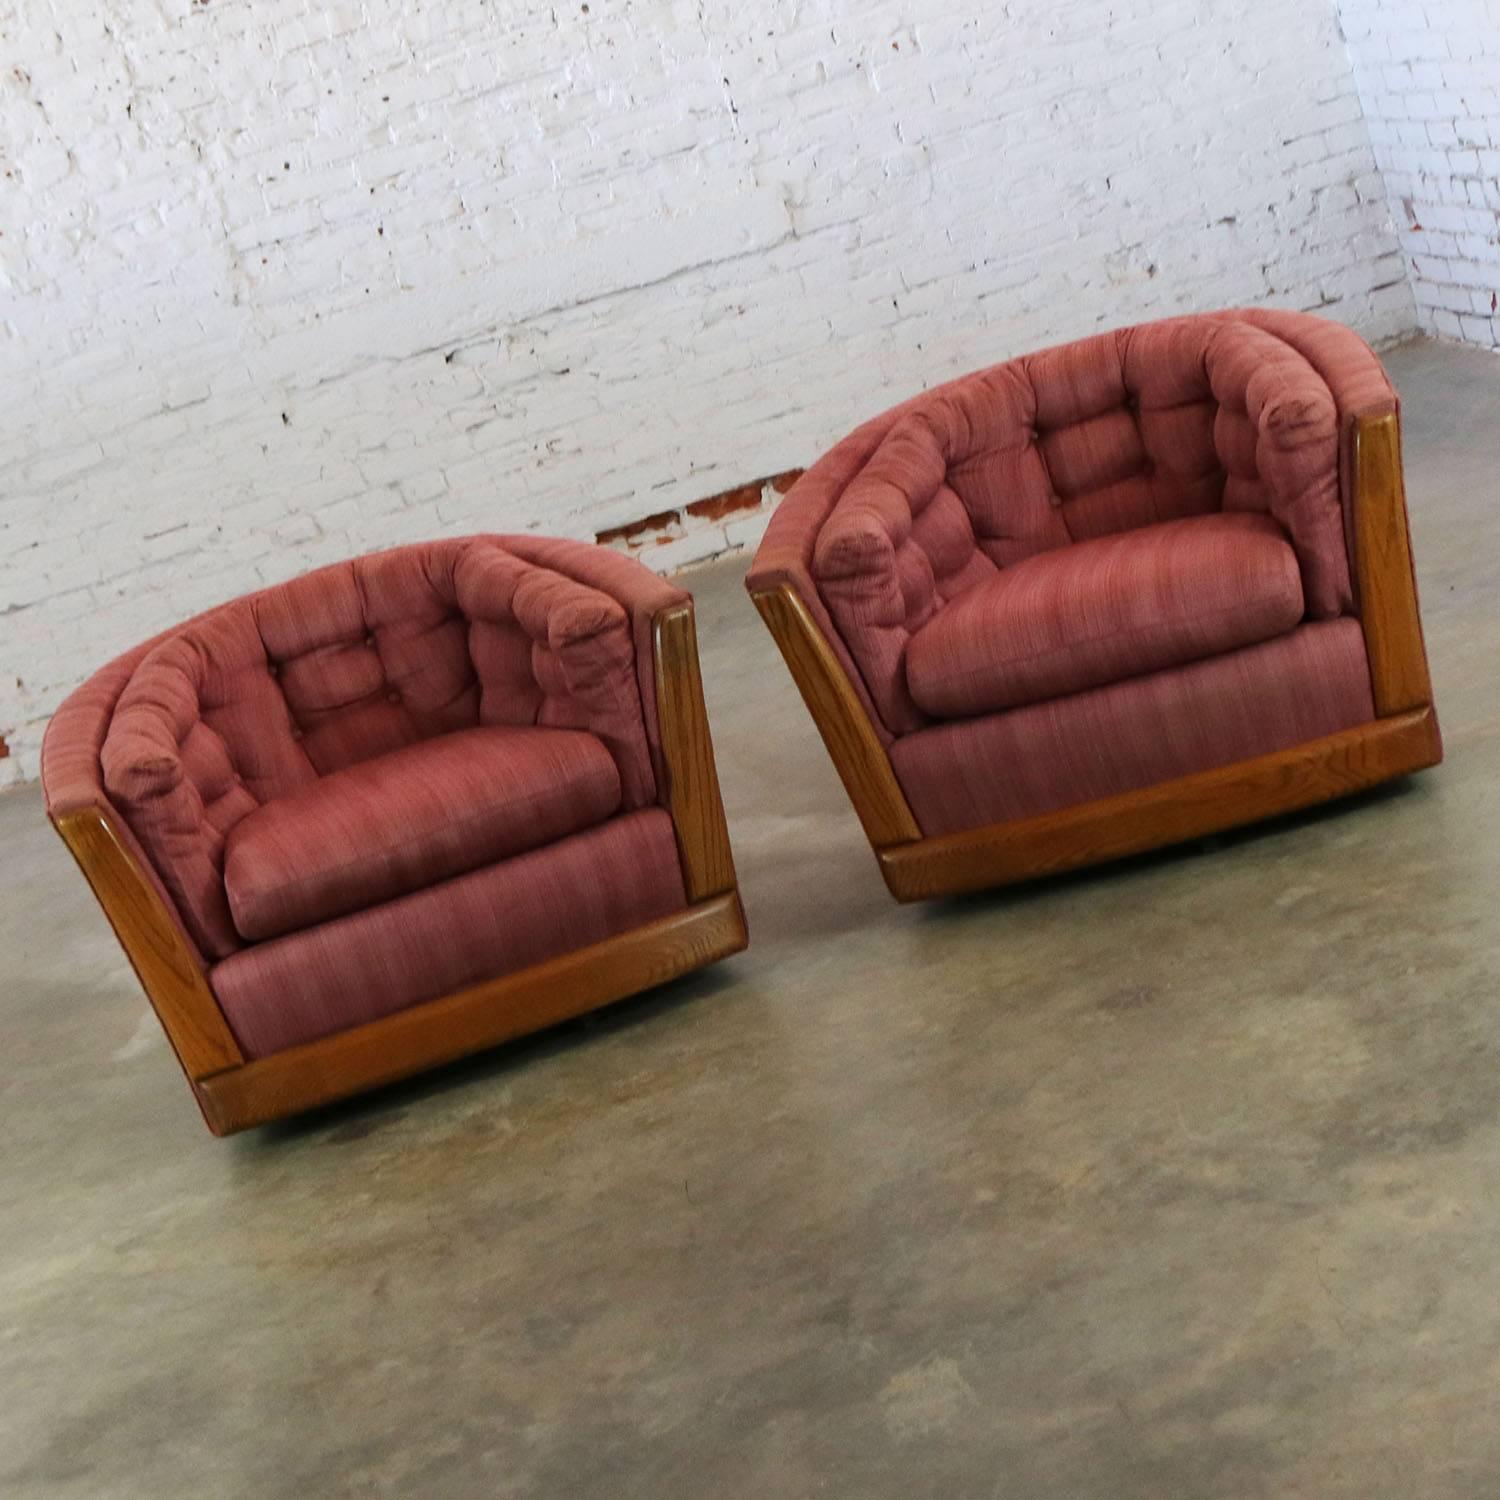 Unusual and awesome pair of modern swivel barrel chairs with oak trim done in the style of Milo Baughman or maybe Harvey Probber. They are in wonderful condition structurally and the wood trim is great as well; however, the original fabric does show